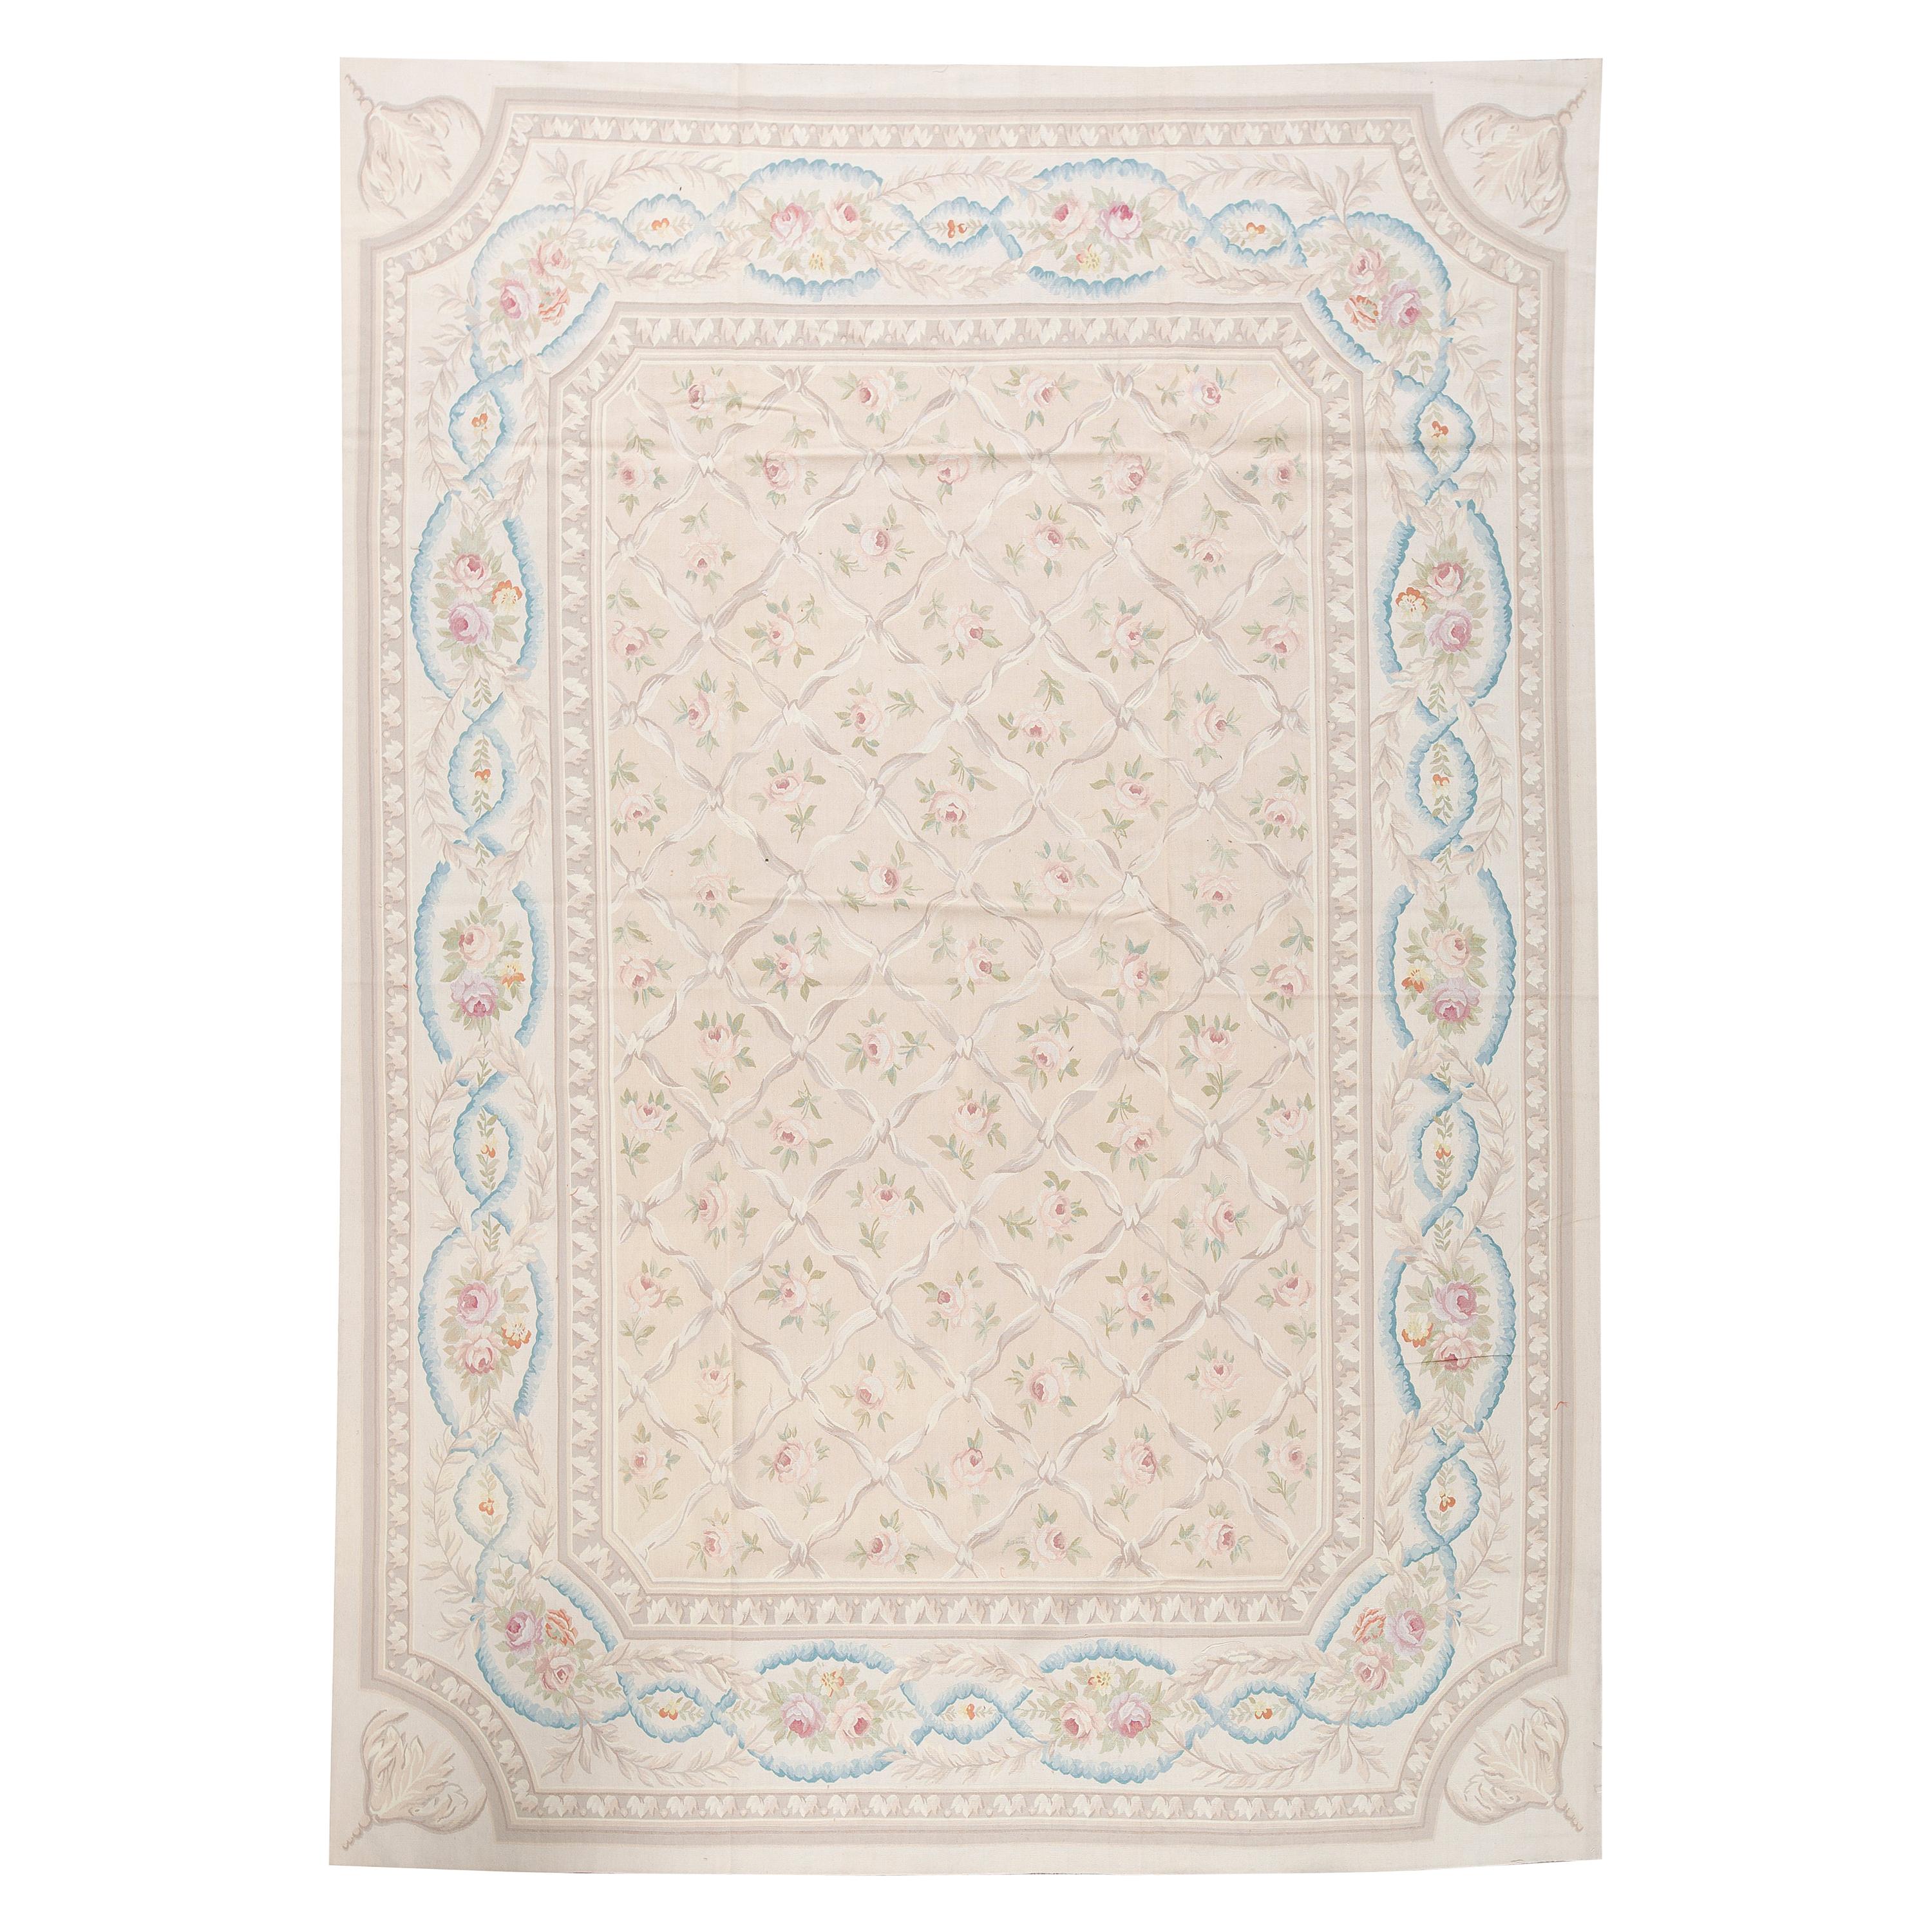 Luxury Traditional French Aubusson Style Flat-Weave Beige / Beige